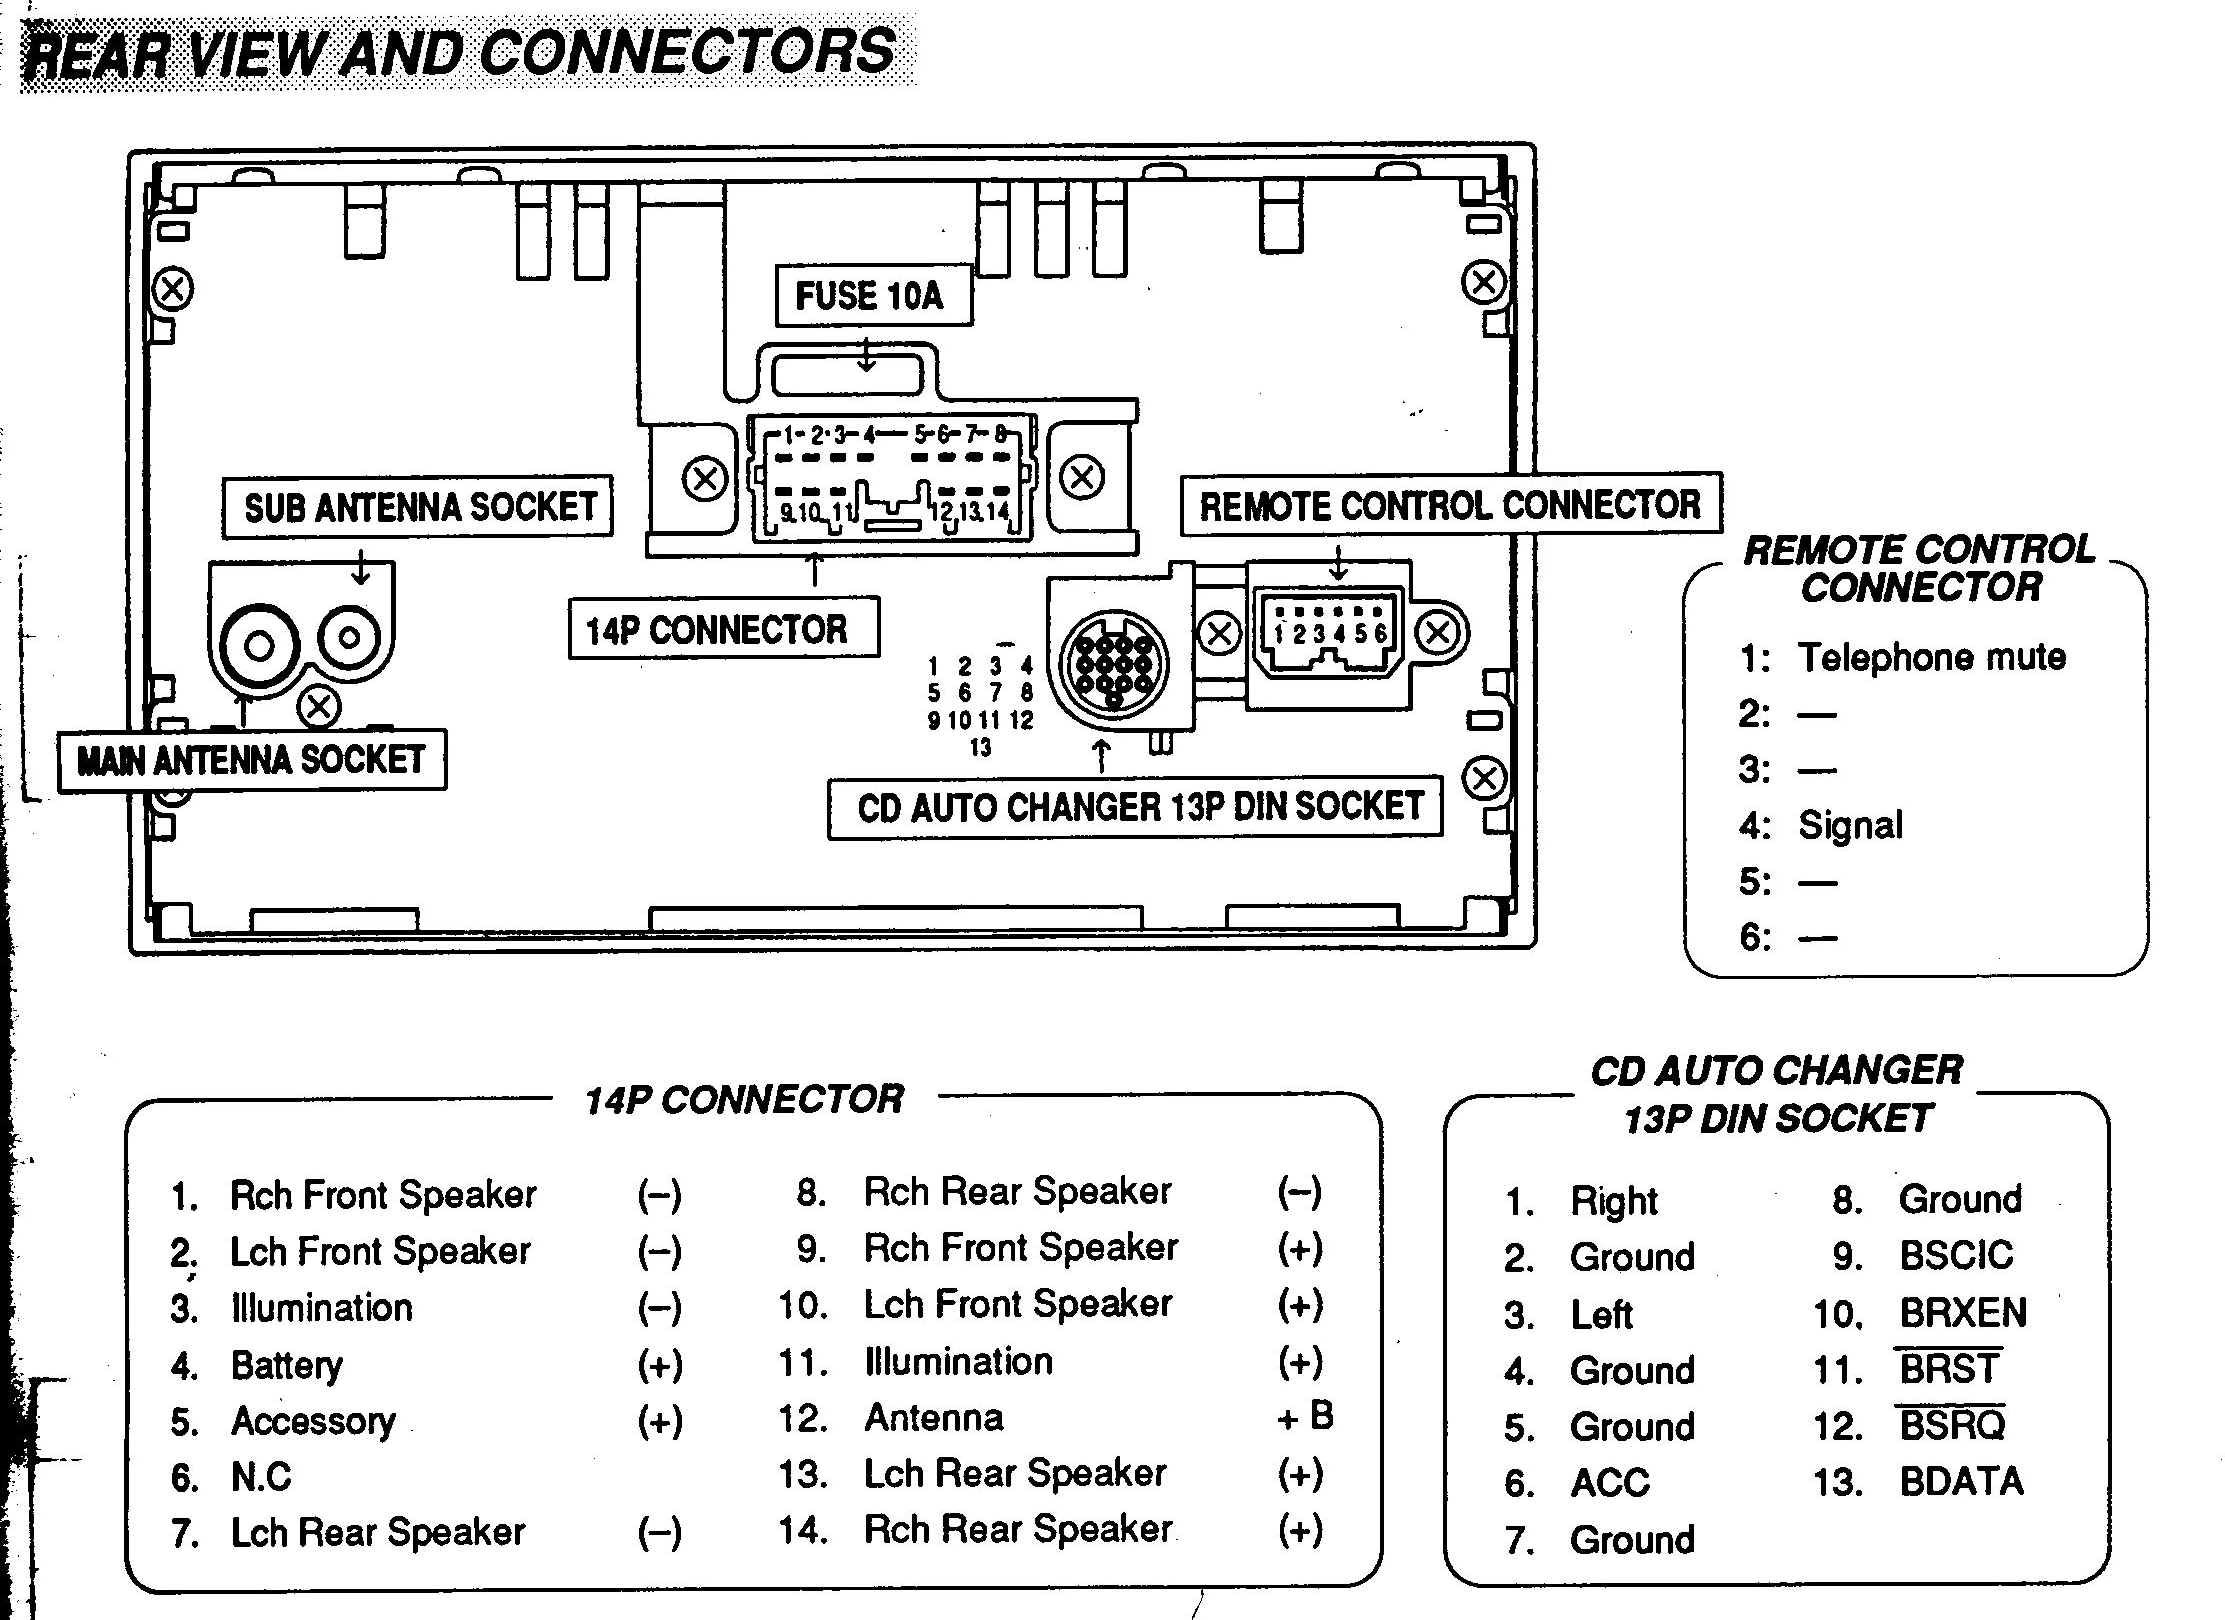 confused by the stock amp | Mitsubishi 3000GT & Dodge Stealth Forum  3000gt Radio Wiring Diagram Site Www.3si.org    Mitsubishi 3000GT & Dodge Stealth Forum